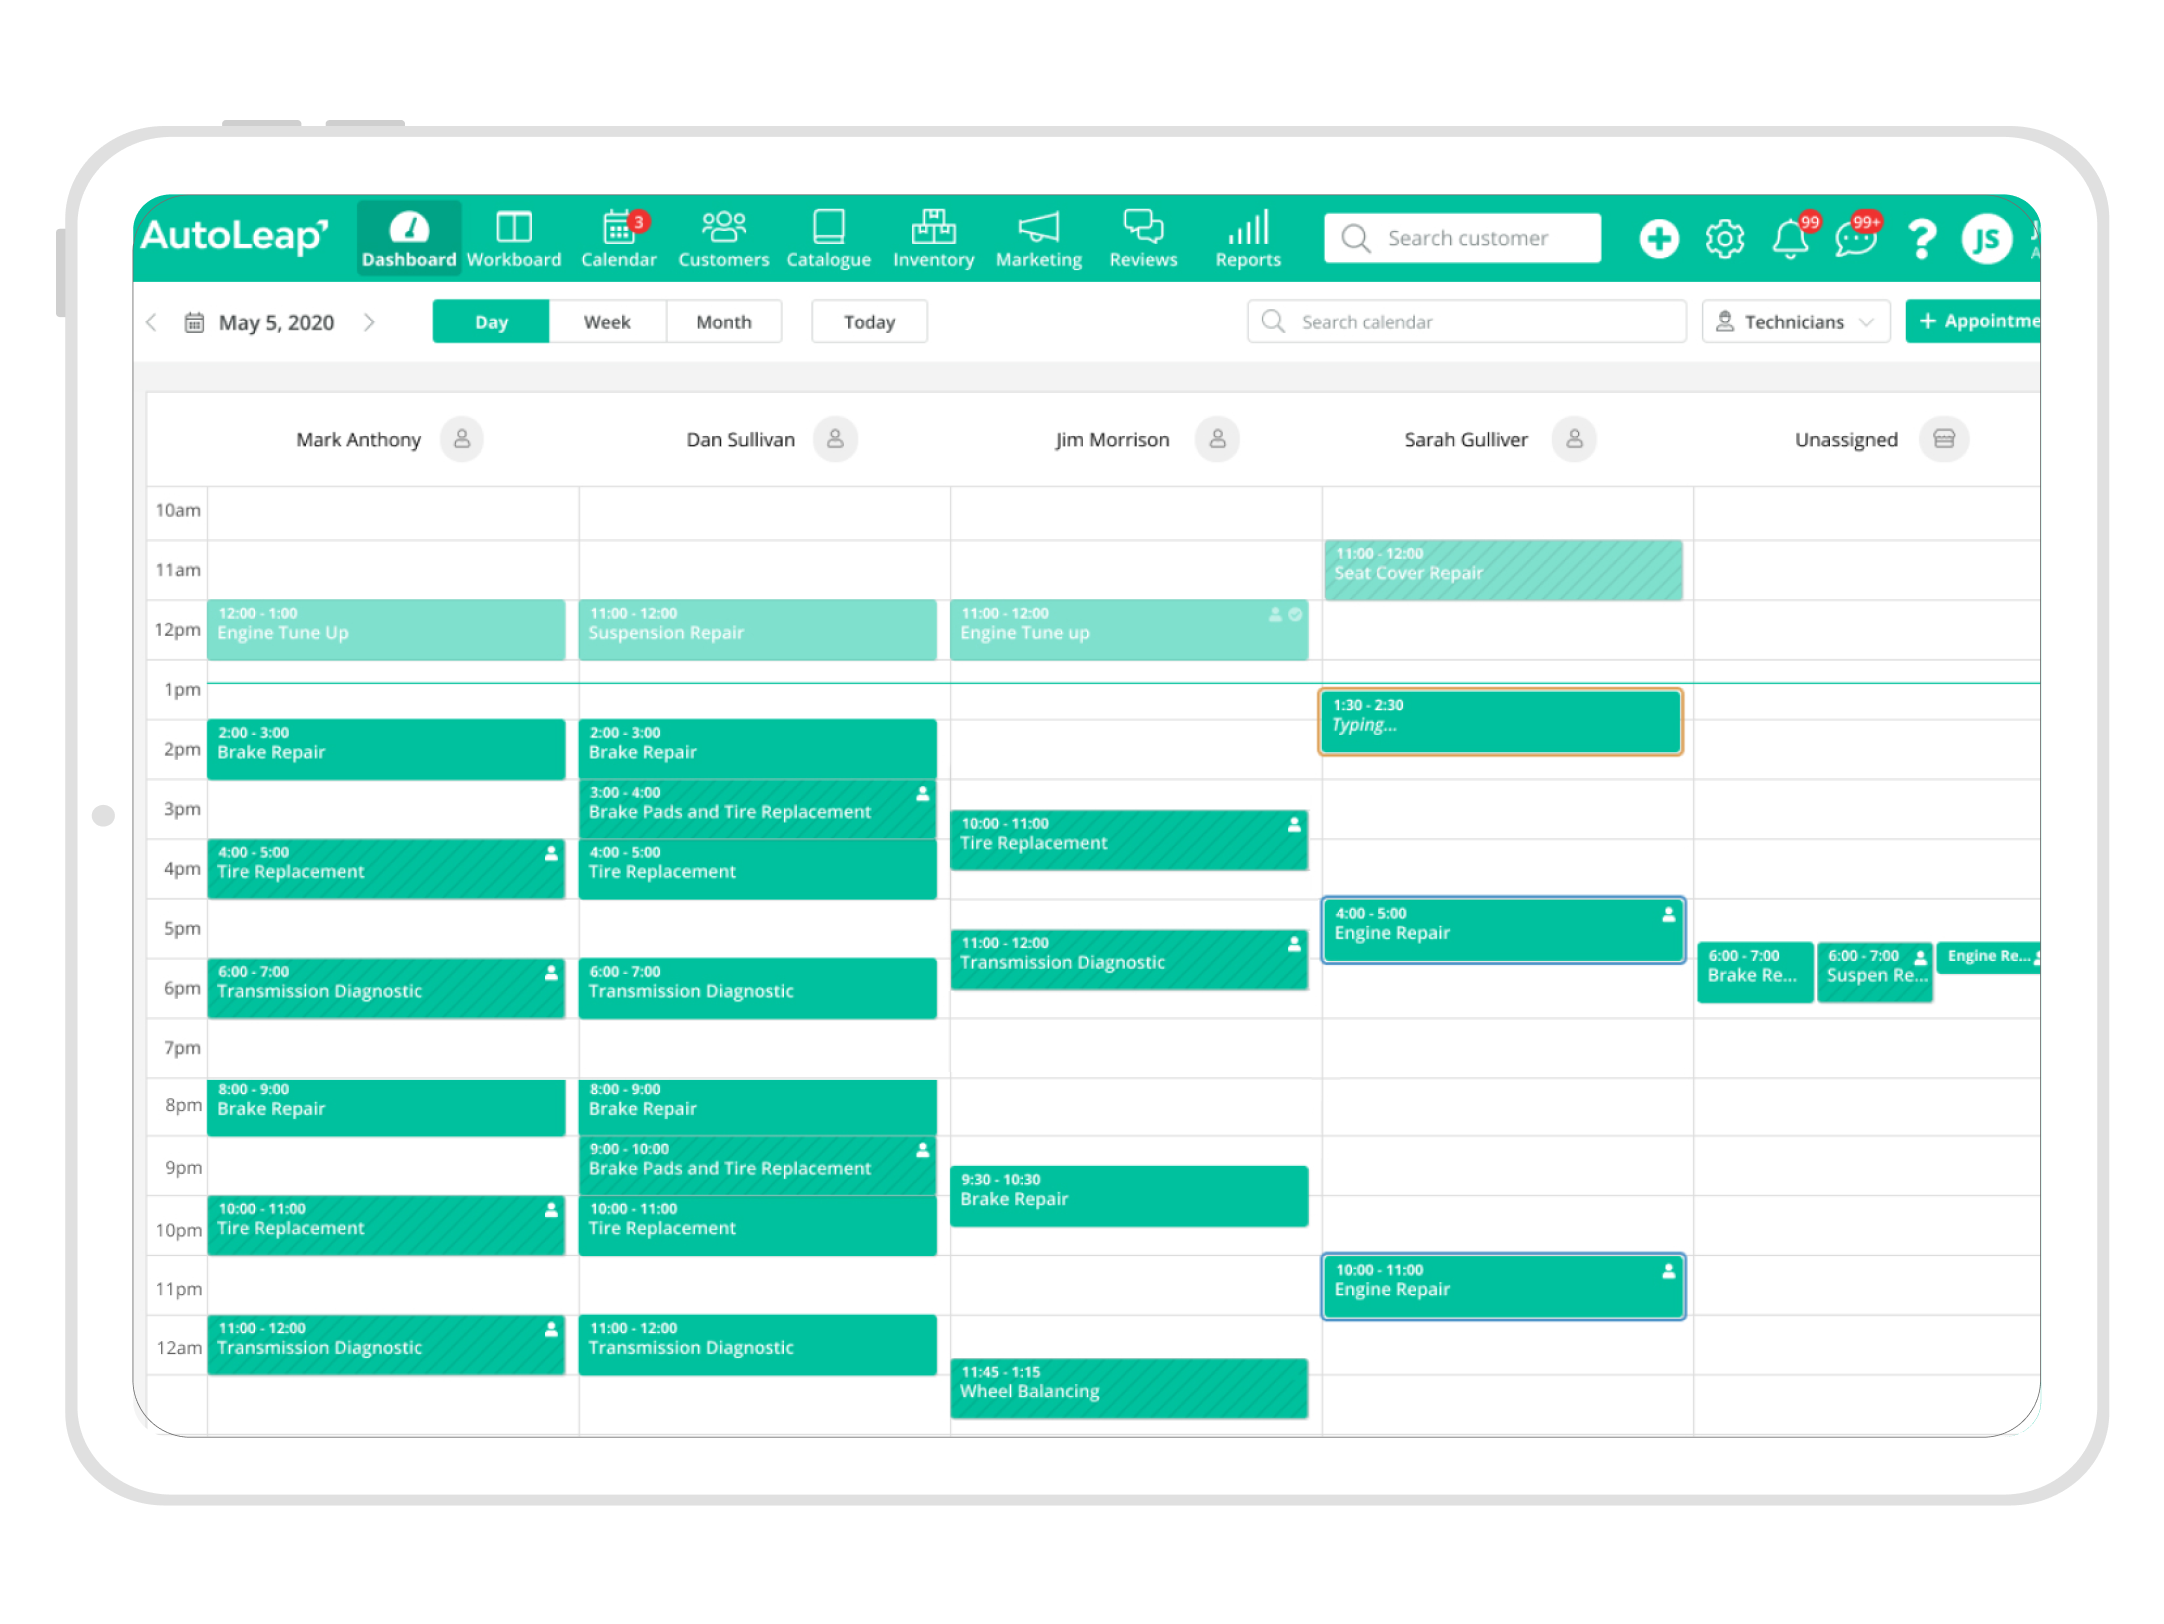 AutoLeap Calendar - Stay on top of your game: AutoLeap’s repair shop management software helps streamline your calendar for the coming days, weeks and months